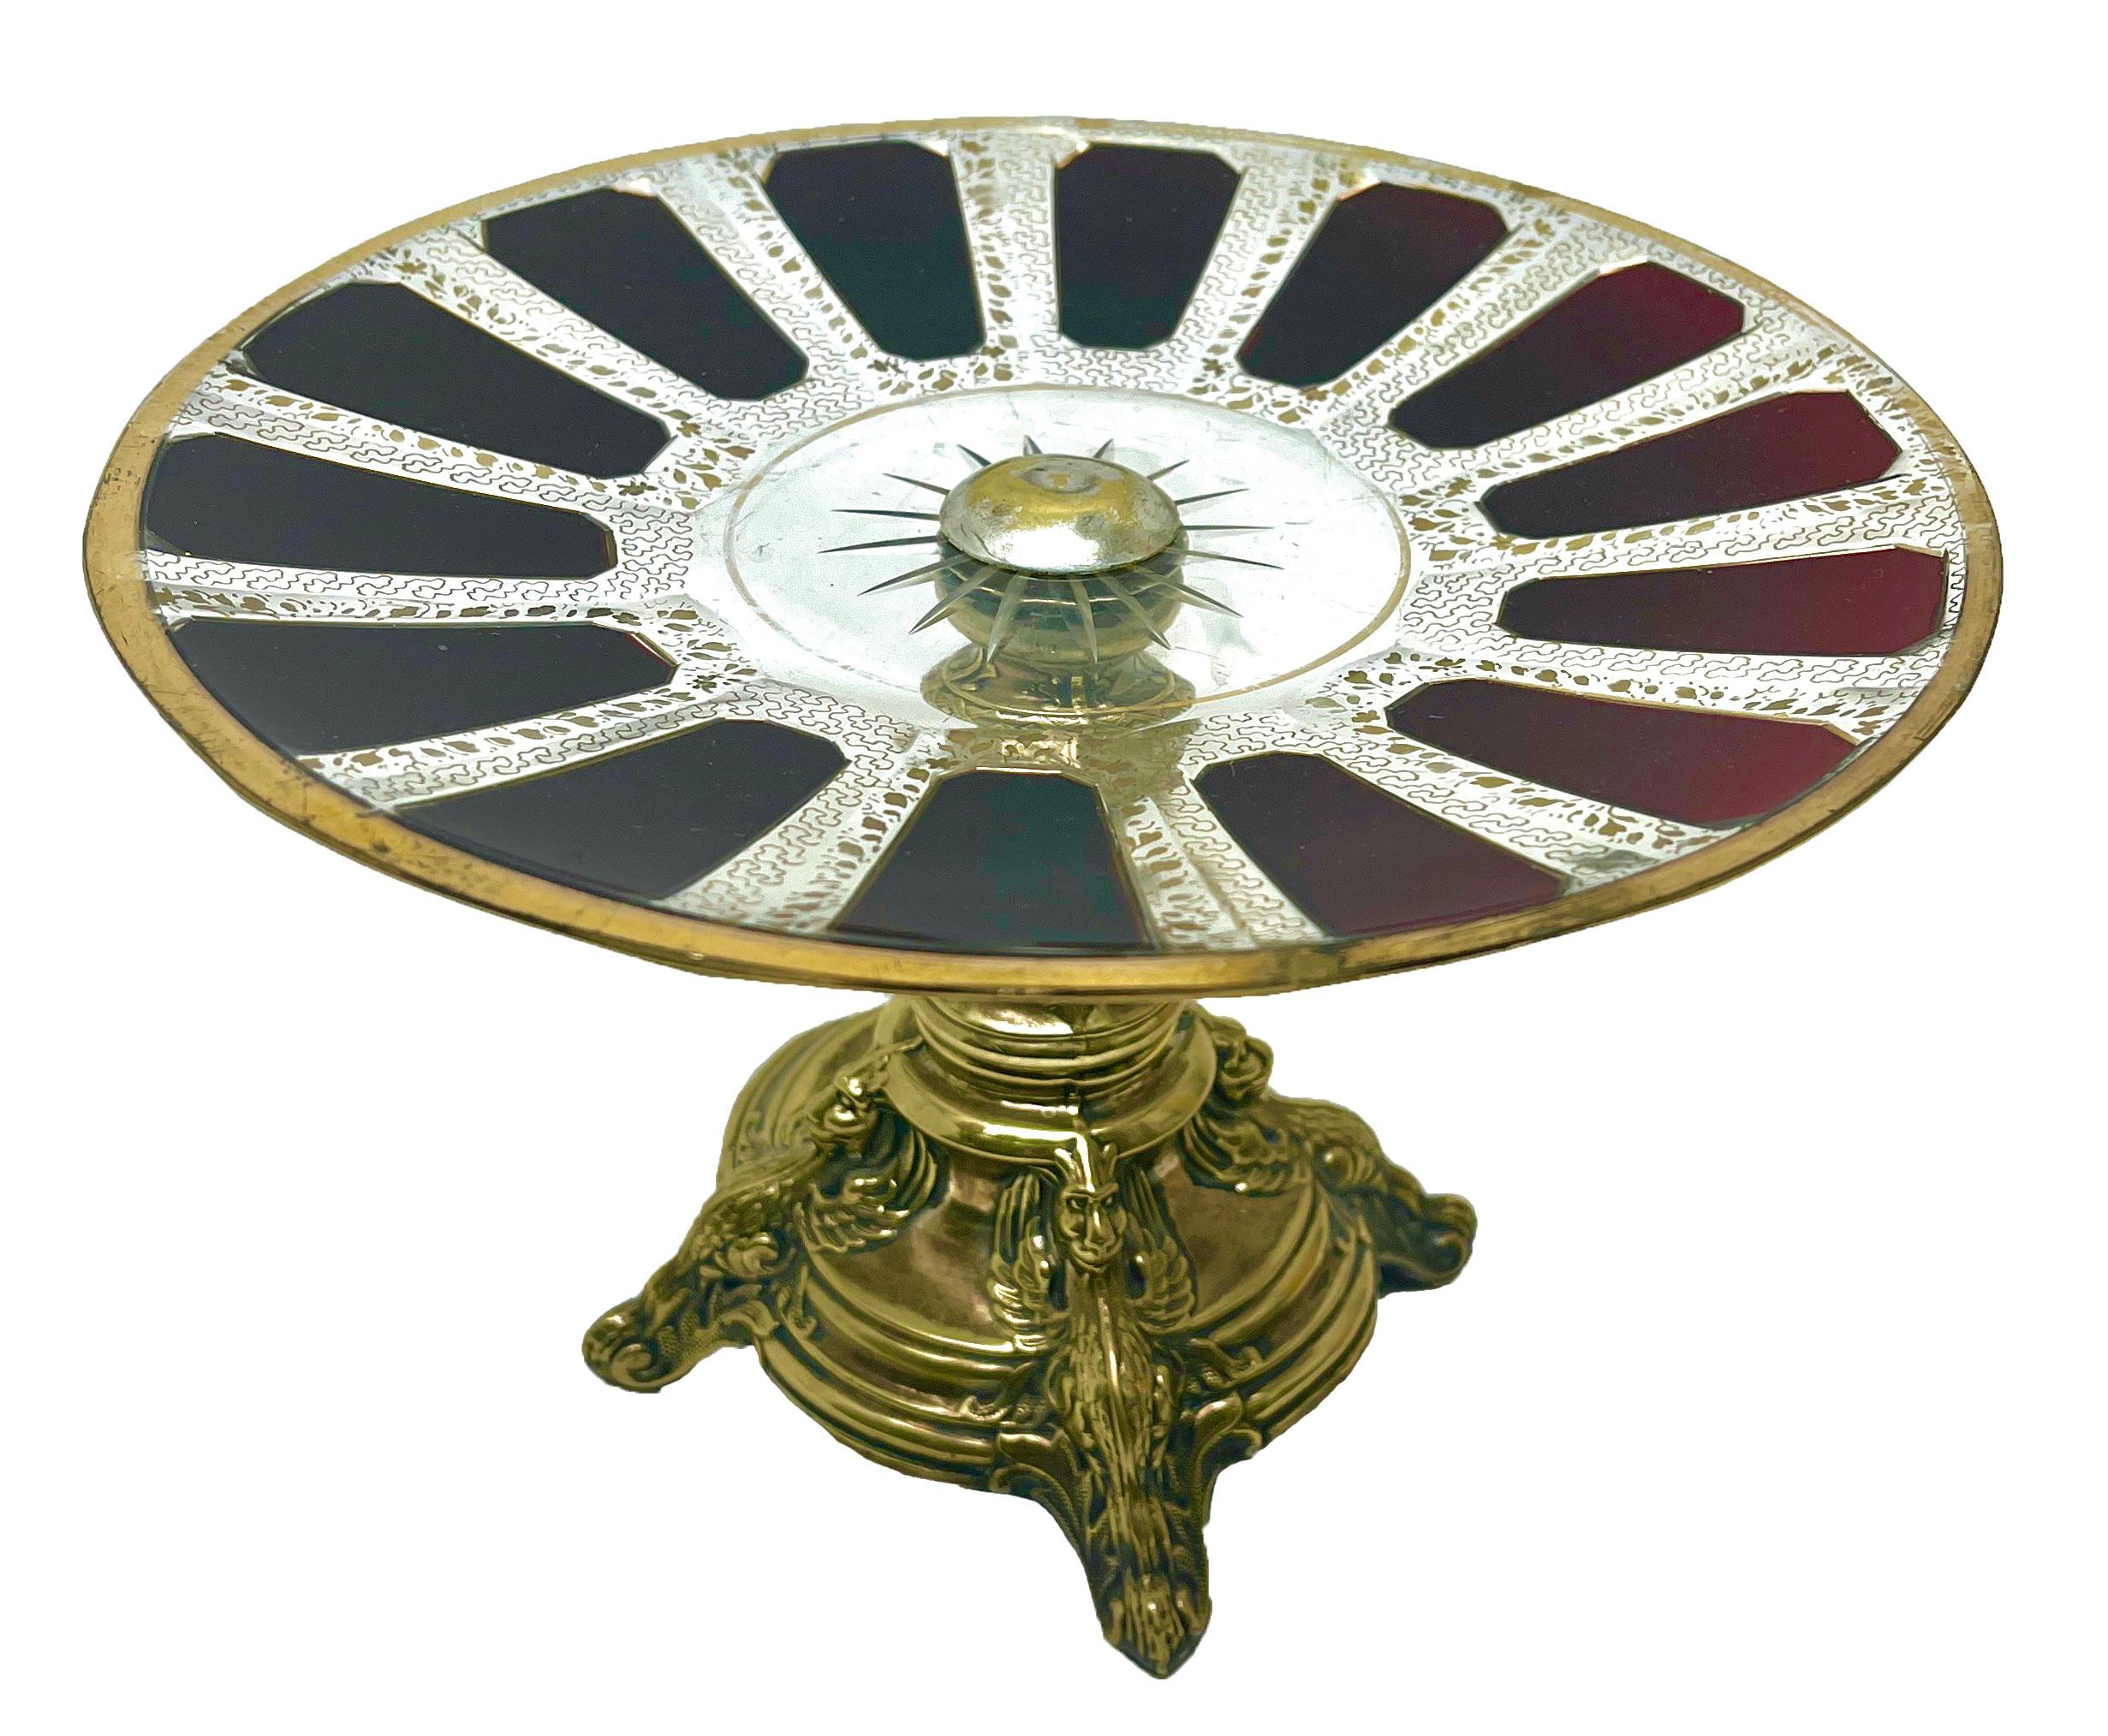 Art Nouveau Centrepiece Attributed to Kayser in Germany, circa 1900 For Sale 1